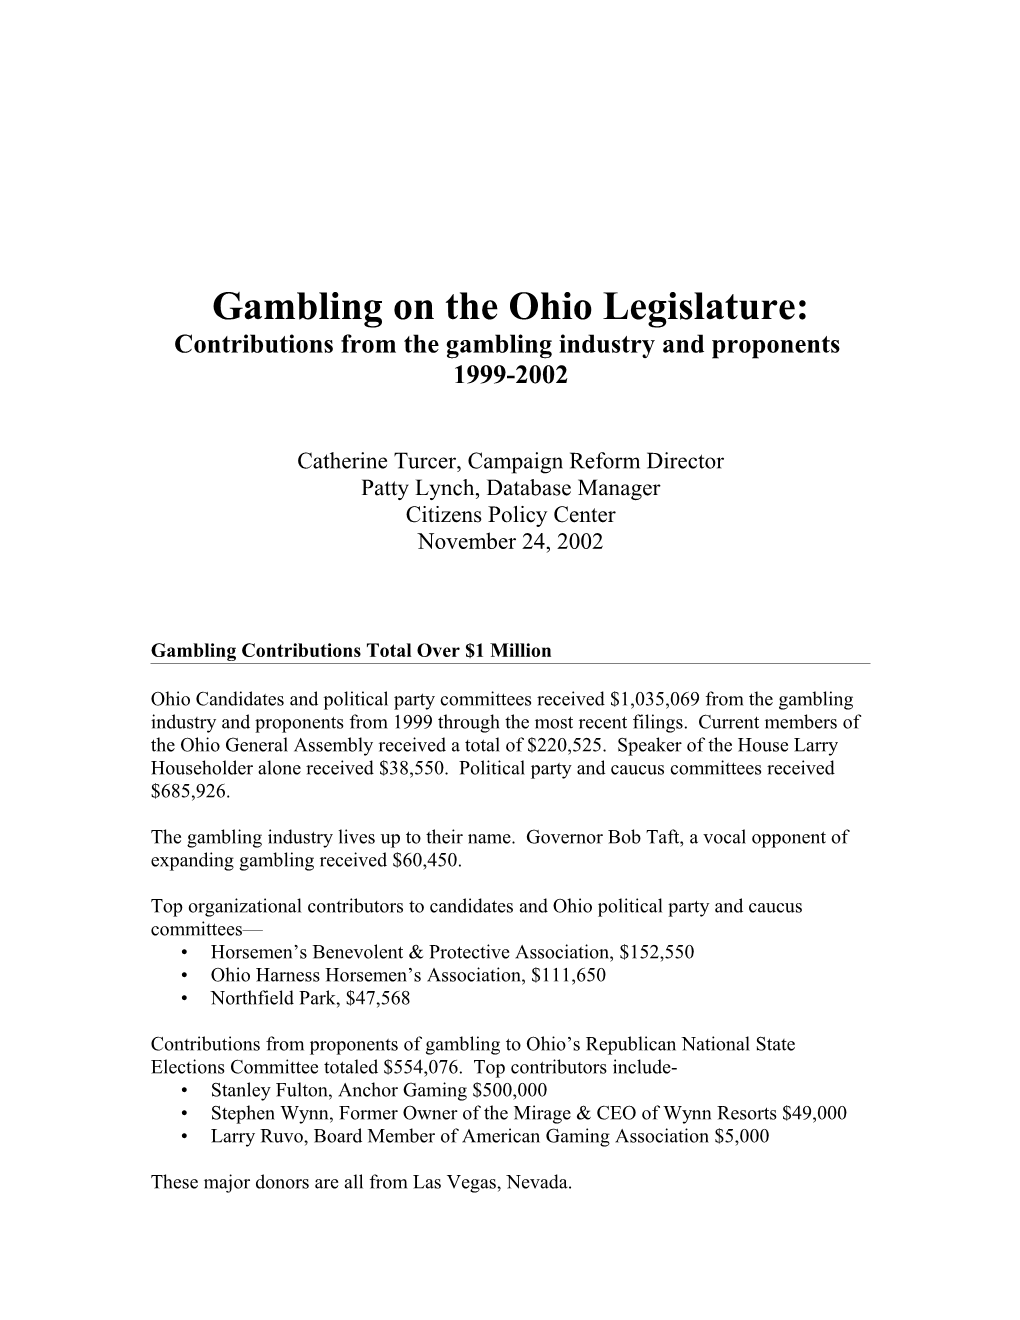 Contributions to Ohio General Assembly